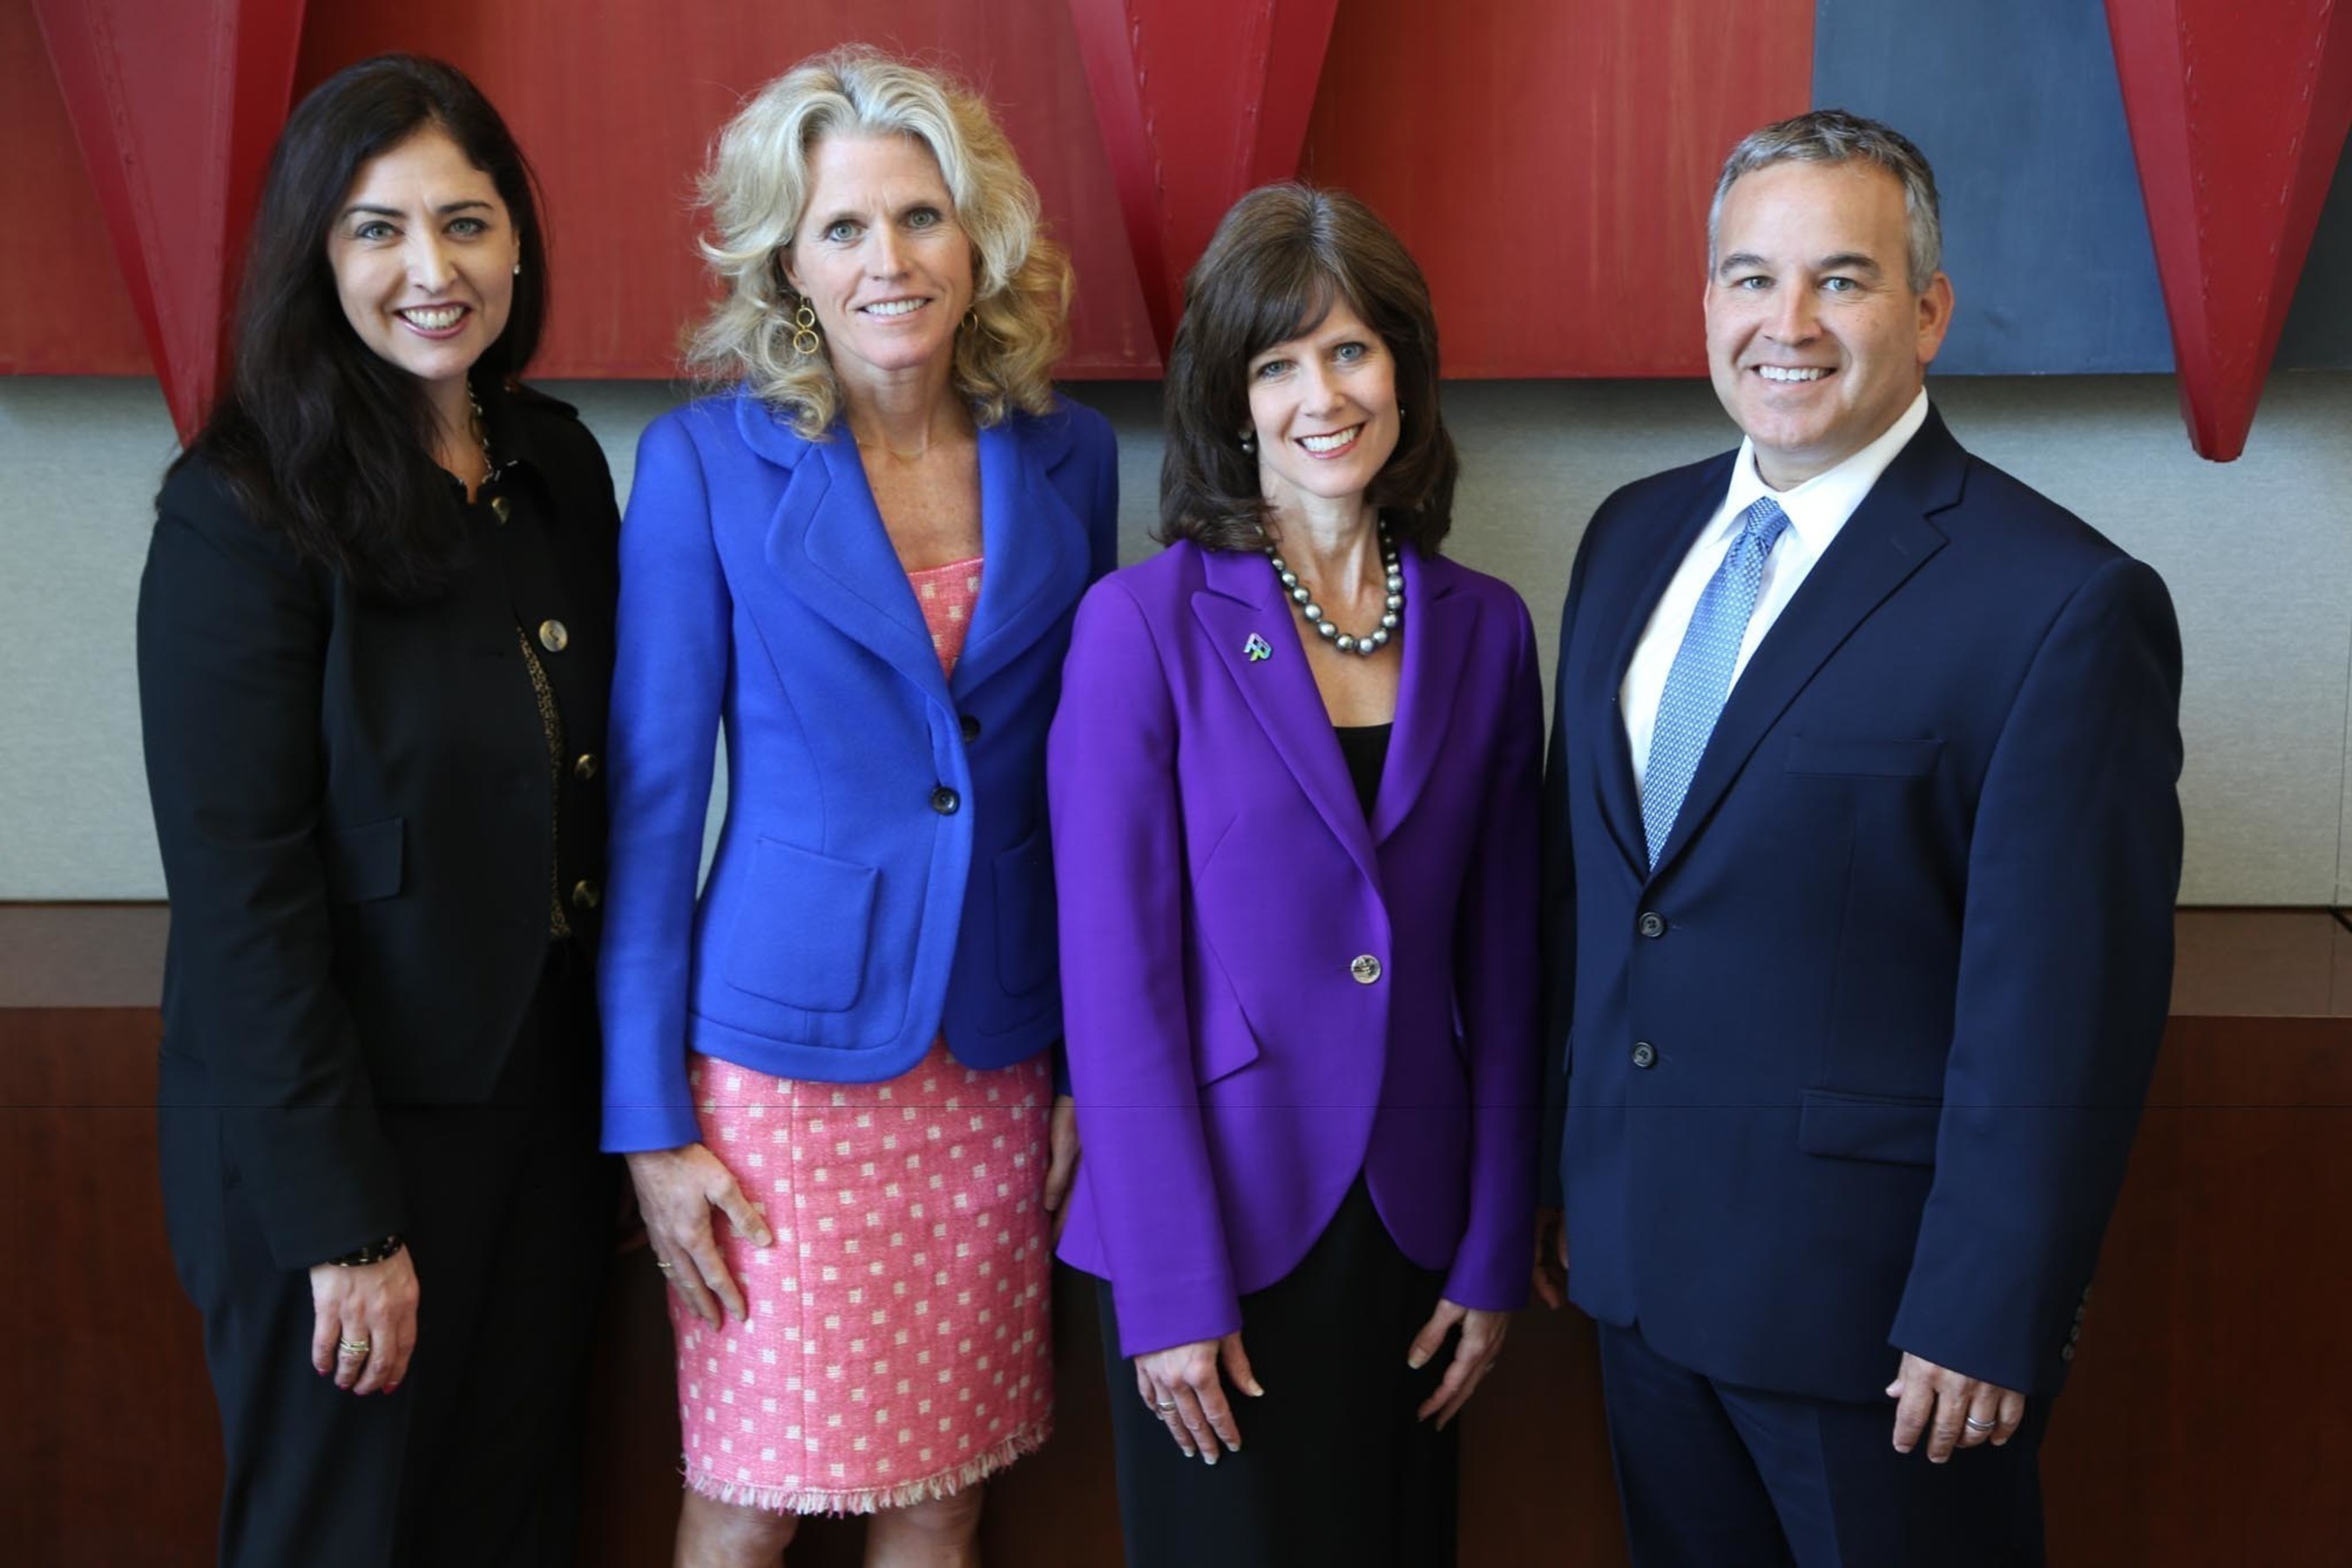 AMN Healthcare corporate governance leaders (L to R): Whitney Laughlin, Deputy General Counsel; Denise Jackson, General Counsel; Susan Salka, President & CEO; and Louis Alonso, Senior Corporate Counsel